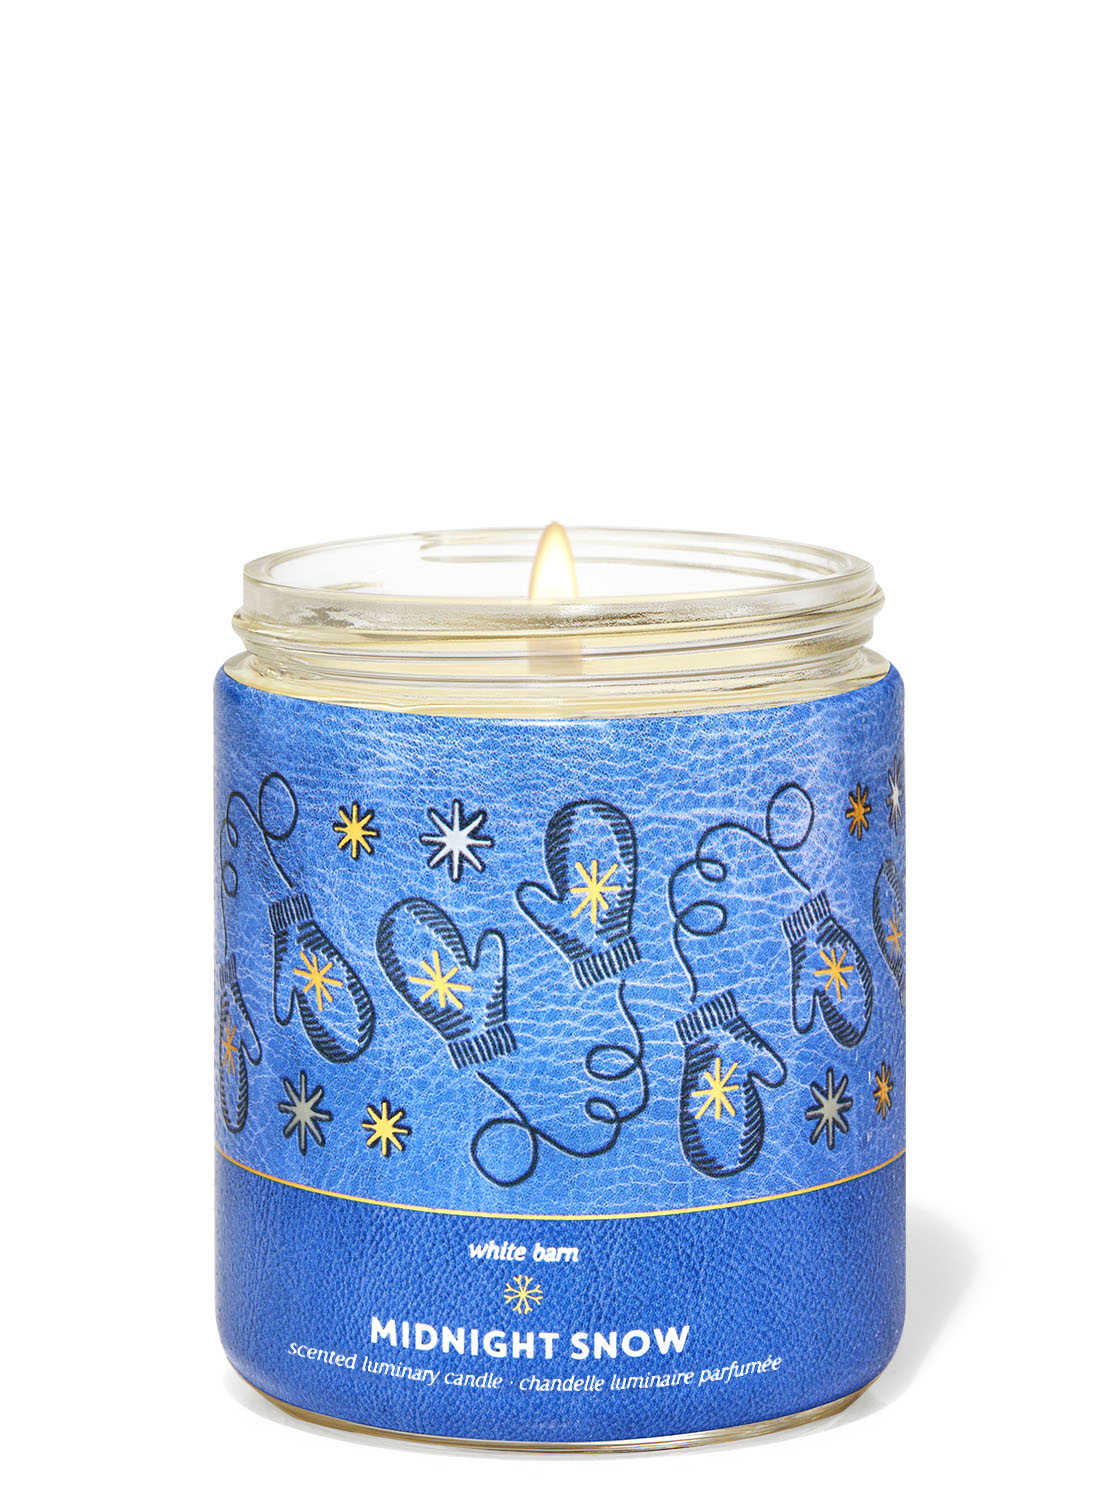 Midnight Snow Single Wick Candle | Bath and Body Works